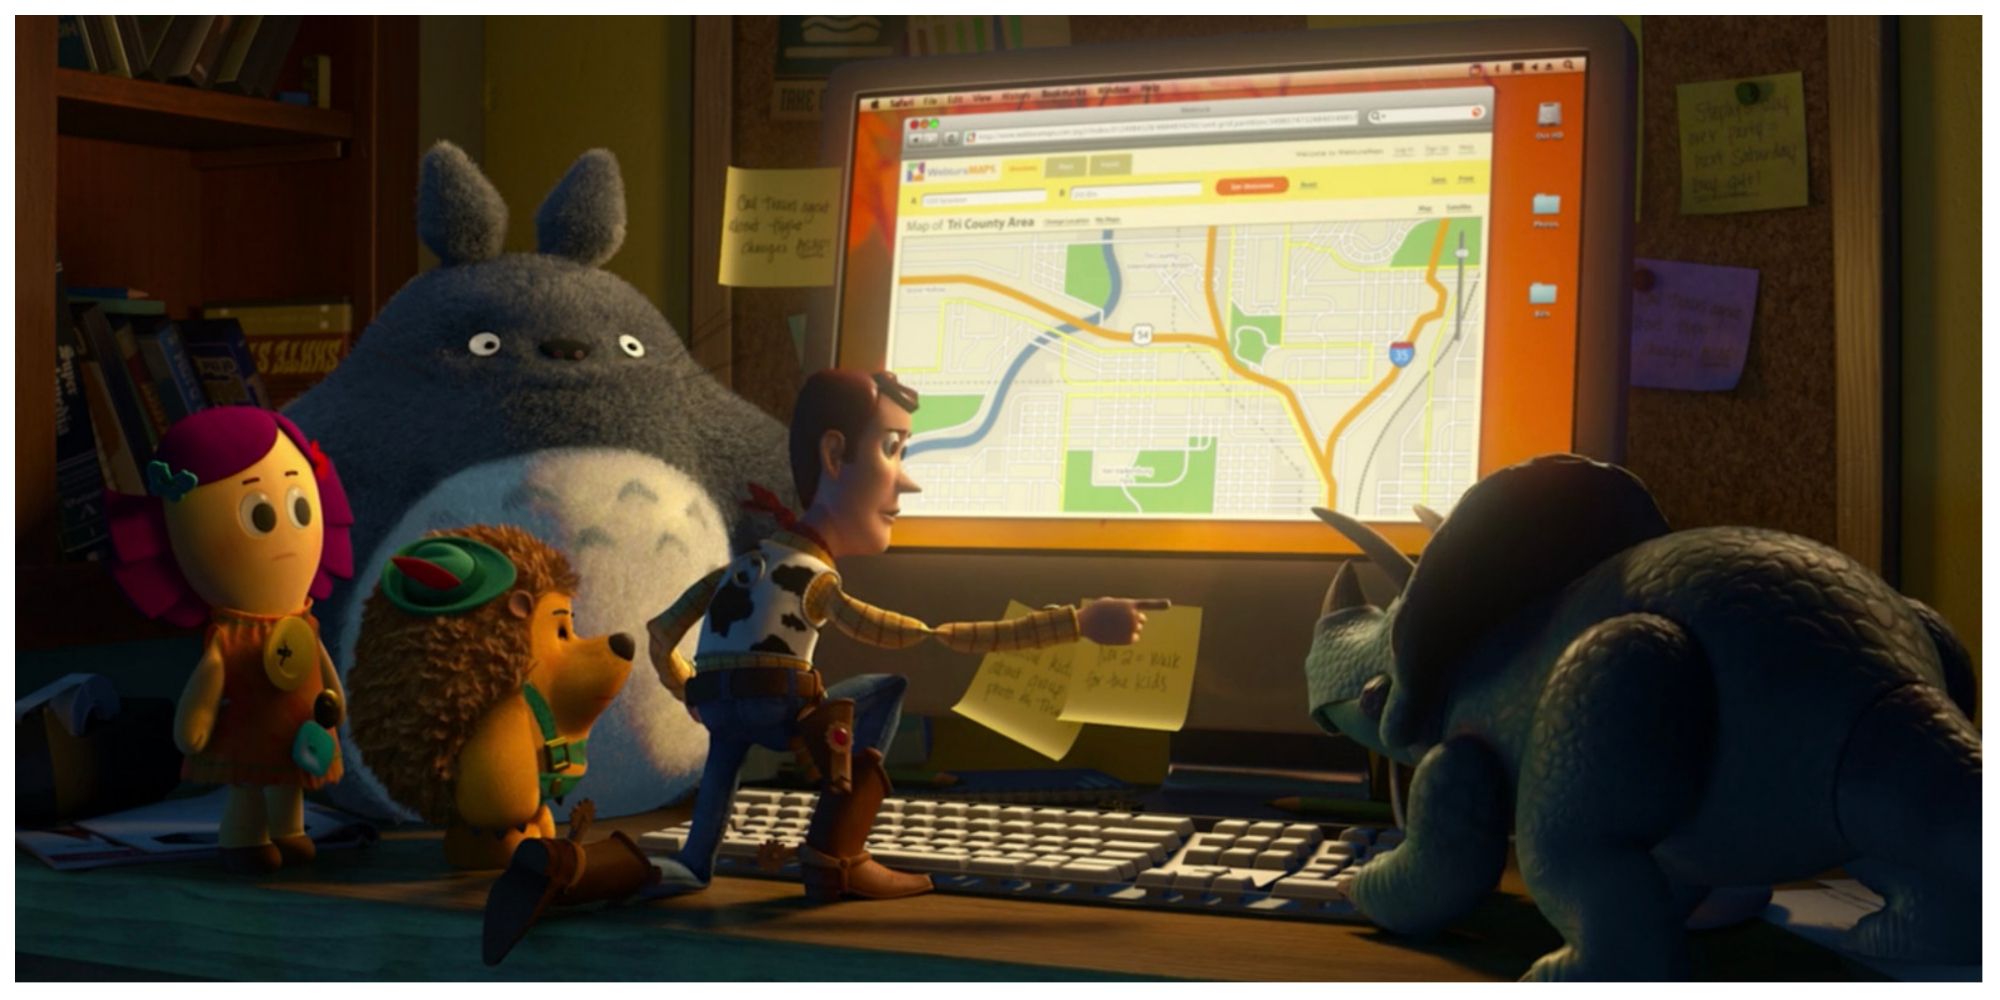 Totoro Appearance In Toy Story 3